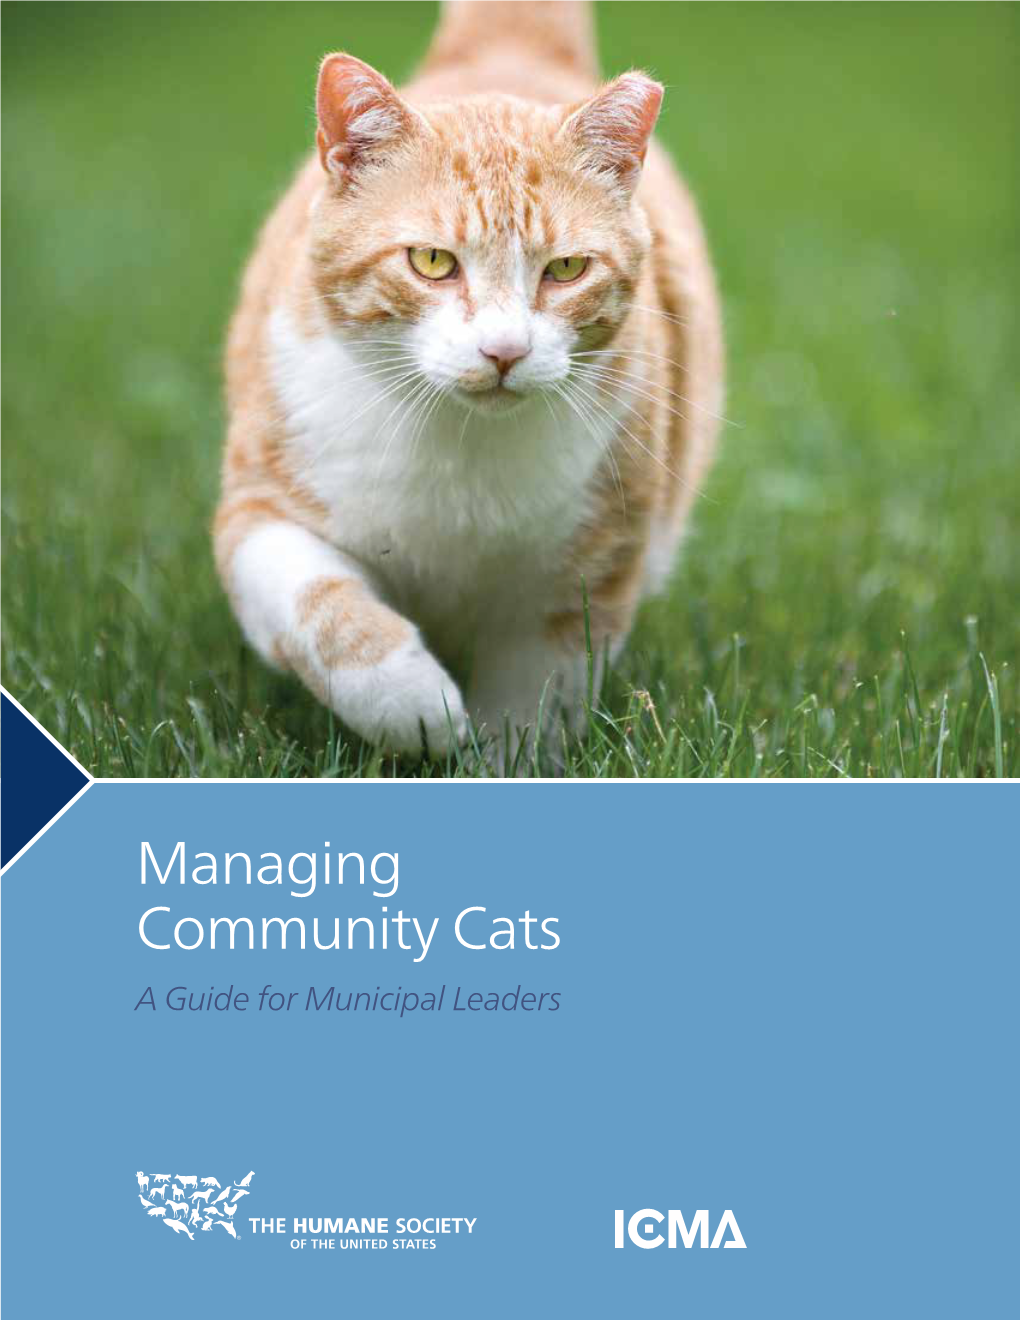 Managing Community Cats Guide